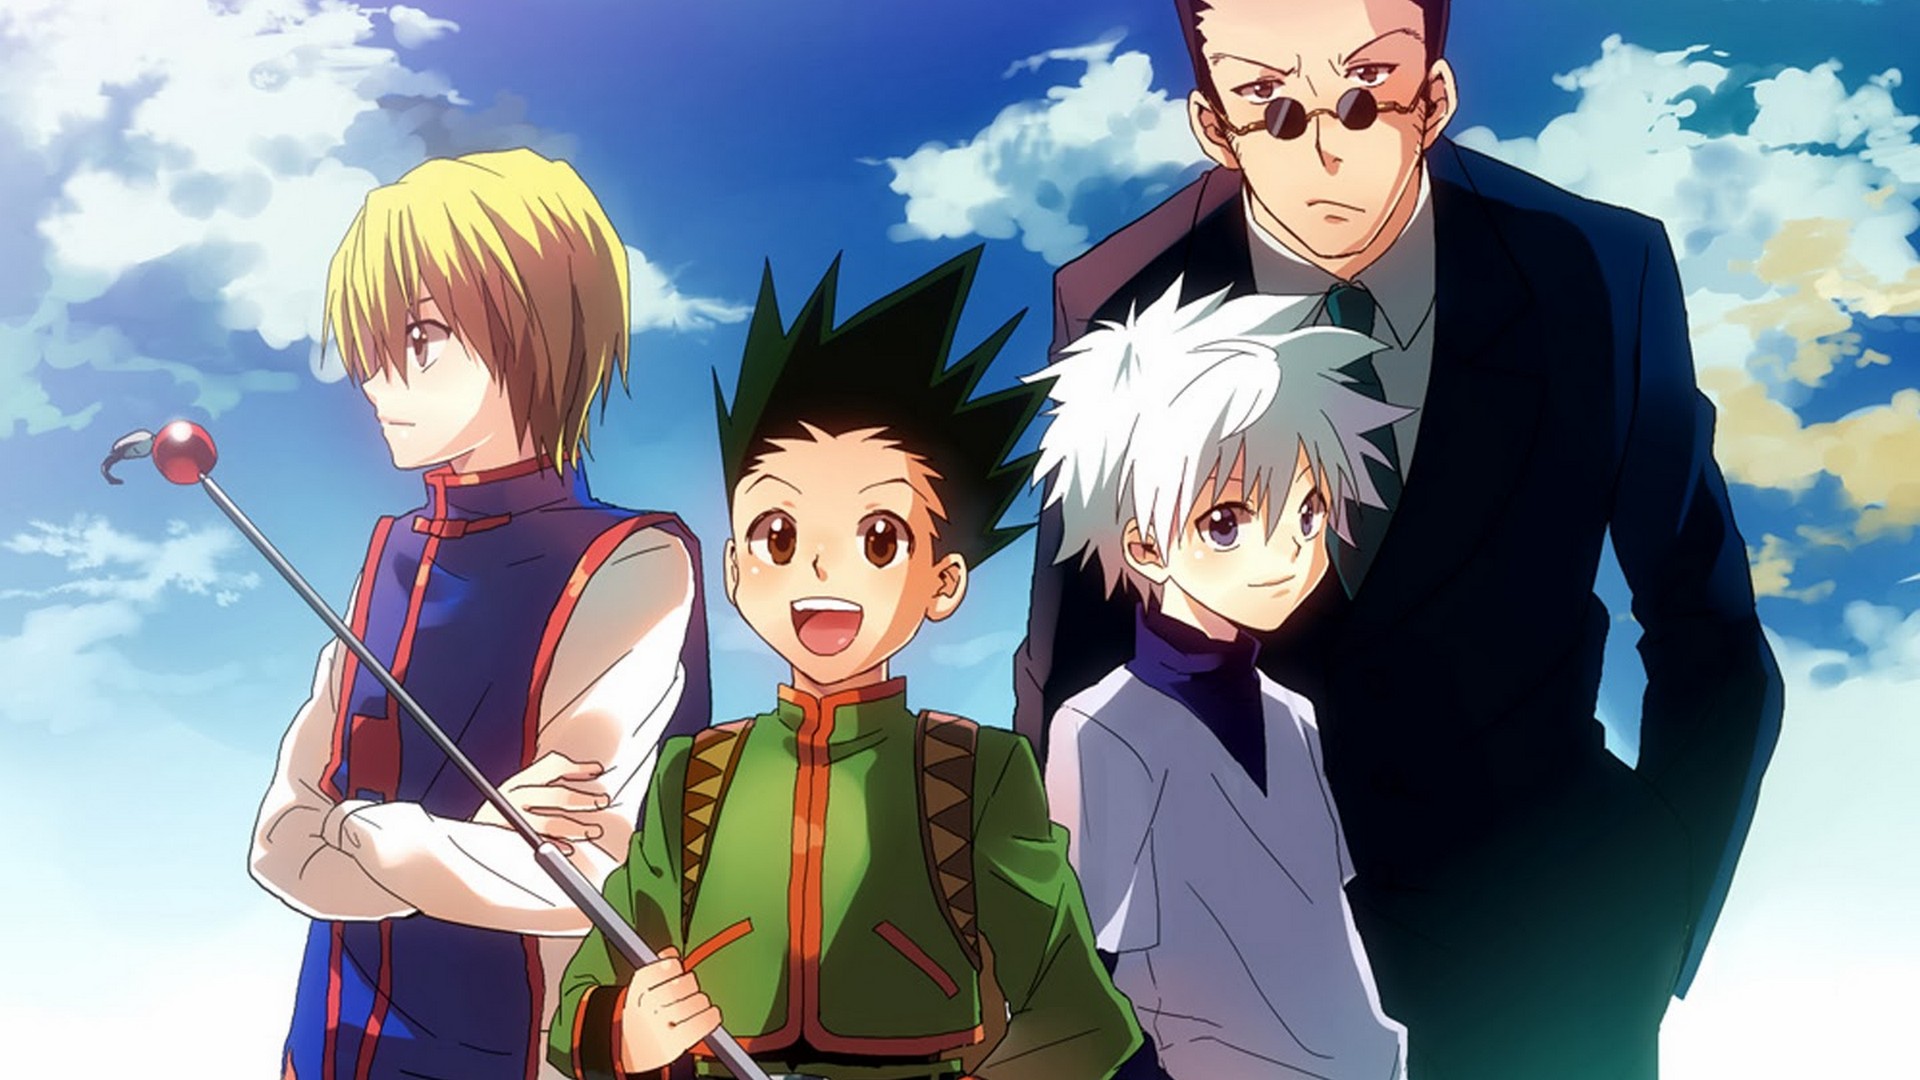 Wallpapers Computer Gon And Killua With high-resolution 1920X1080 pixel. You can use this wallpaper for your Desktop Computer Backgrounds, Mac Wallpapers, Android Lock screen or iPhone Screensavers and another smartphone device